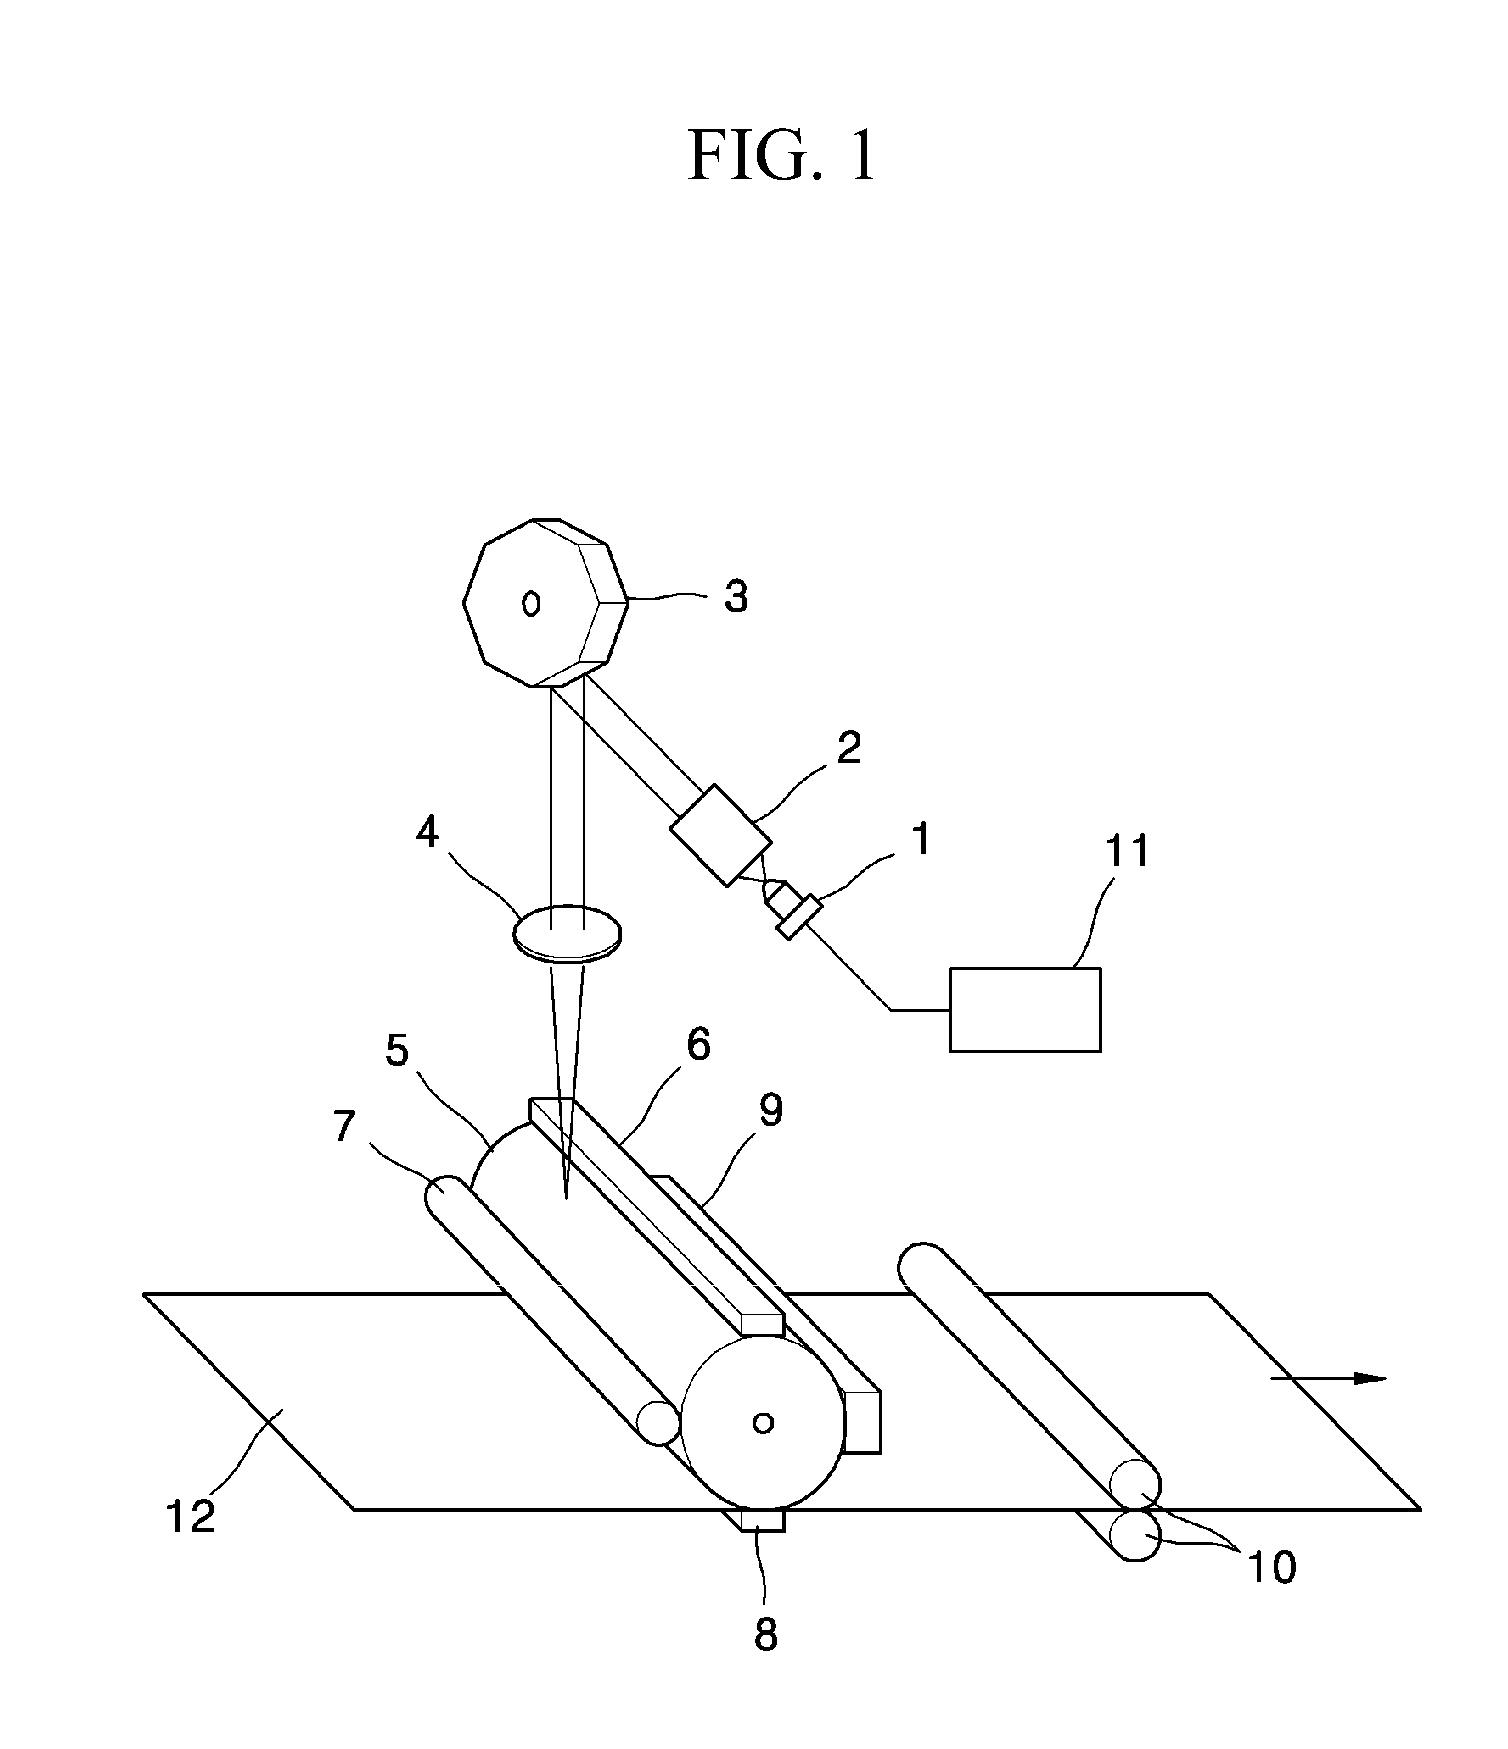 Electrophotographic photoreceptor having excellent electrical properties and image quality and their high stabilities and electrophotographic imaging apparatus employing the same